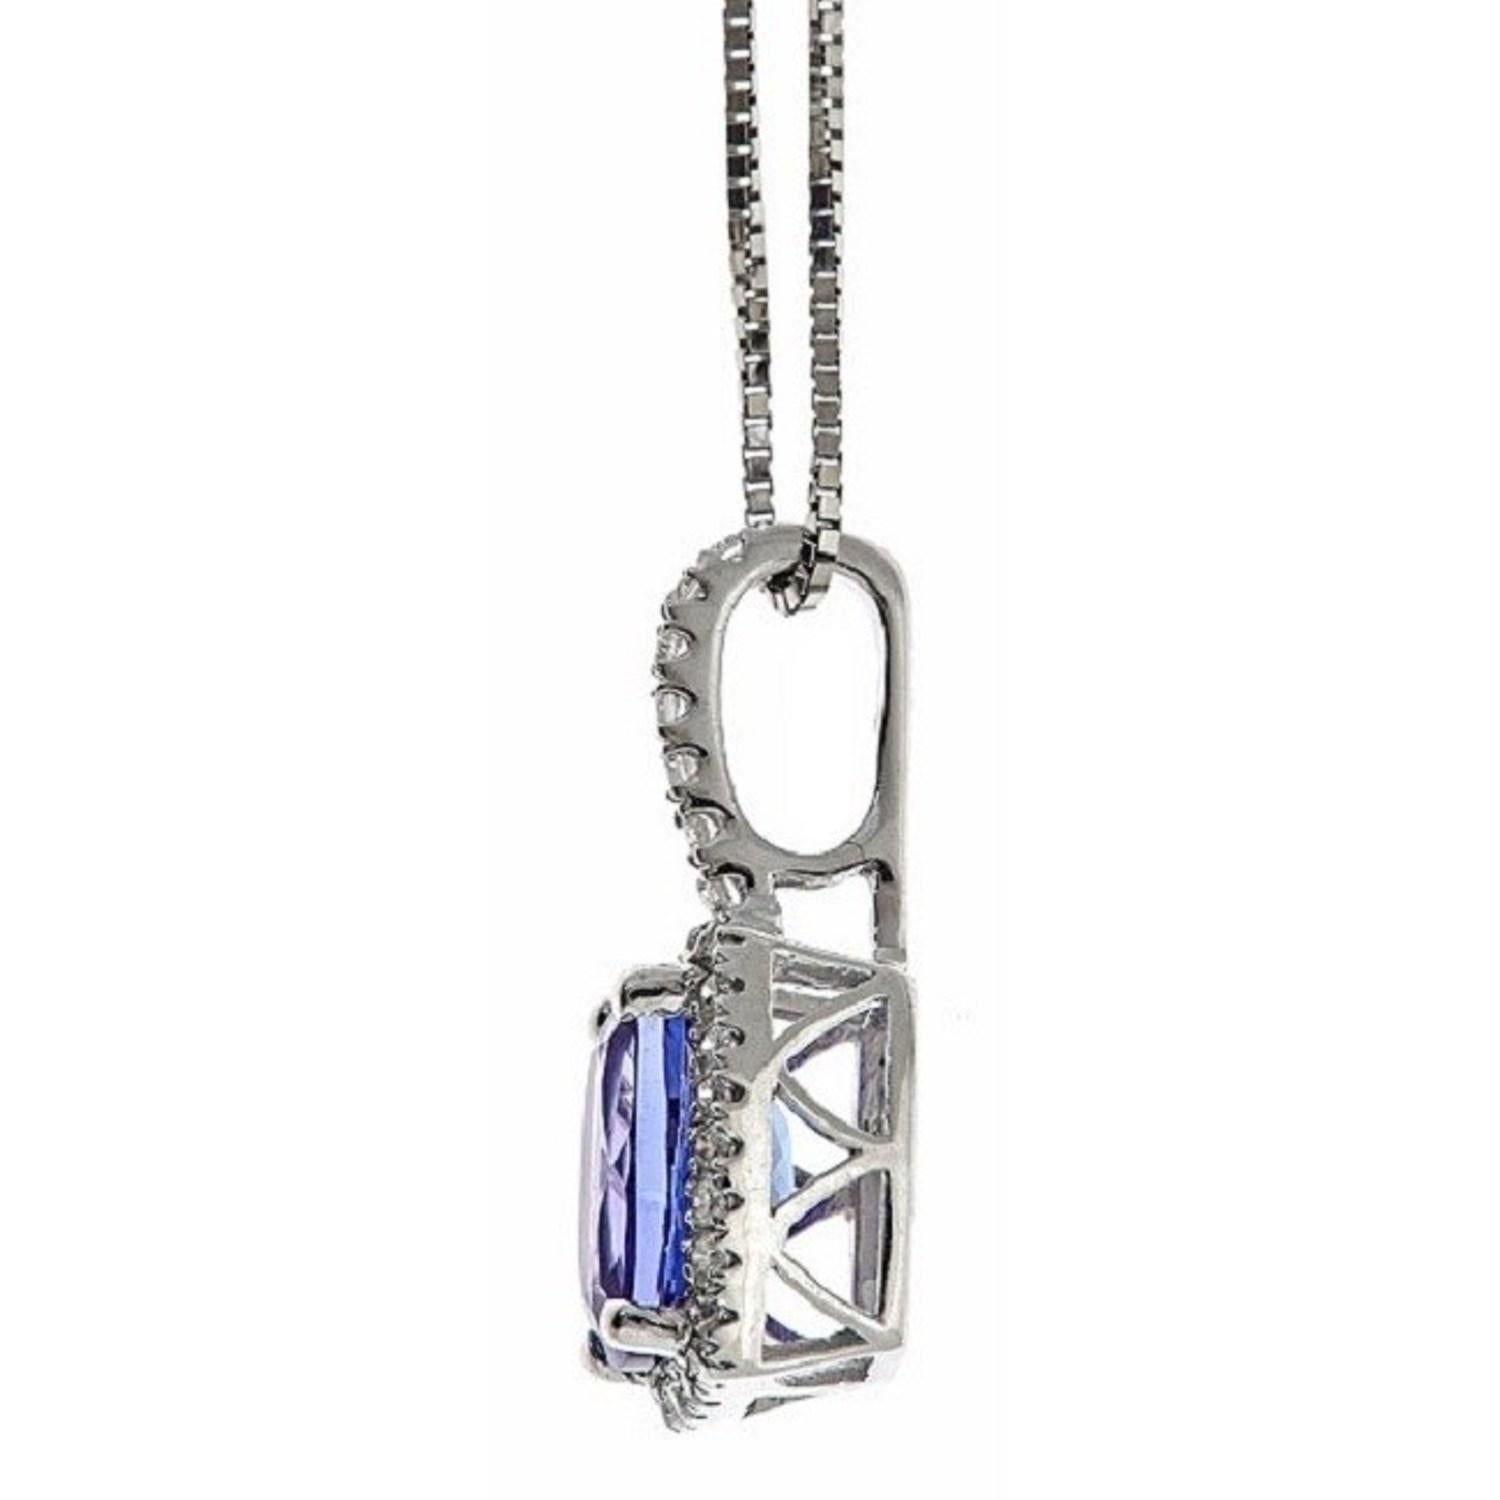 Decorate yourself in elegance with this Pendant is crafted from 10-karat White Gold by Gin & Grace. This Pendant is made up of Cushion-Cut Tanzanite (1 pcs) 1.06 carat and Round-cut White Diamond (33 Pcs) 0.11 Carat. This Pendant is weight 0.66